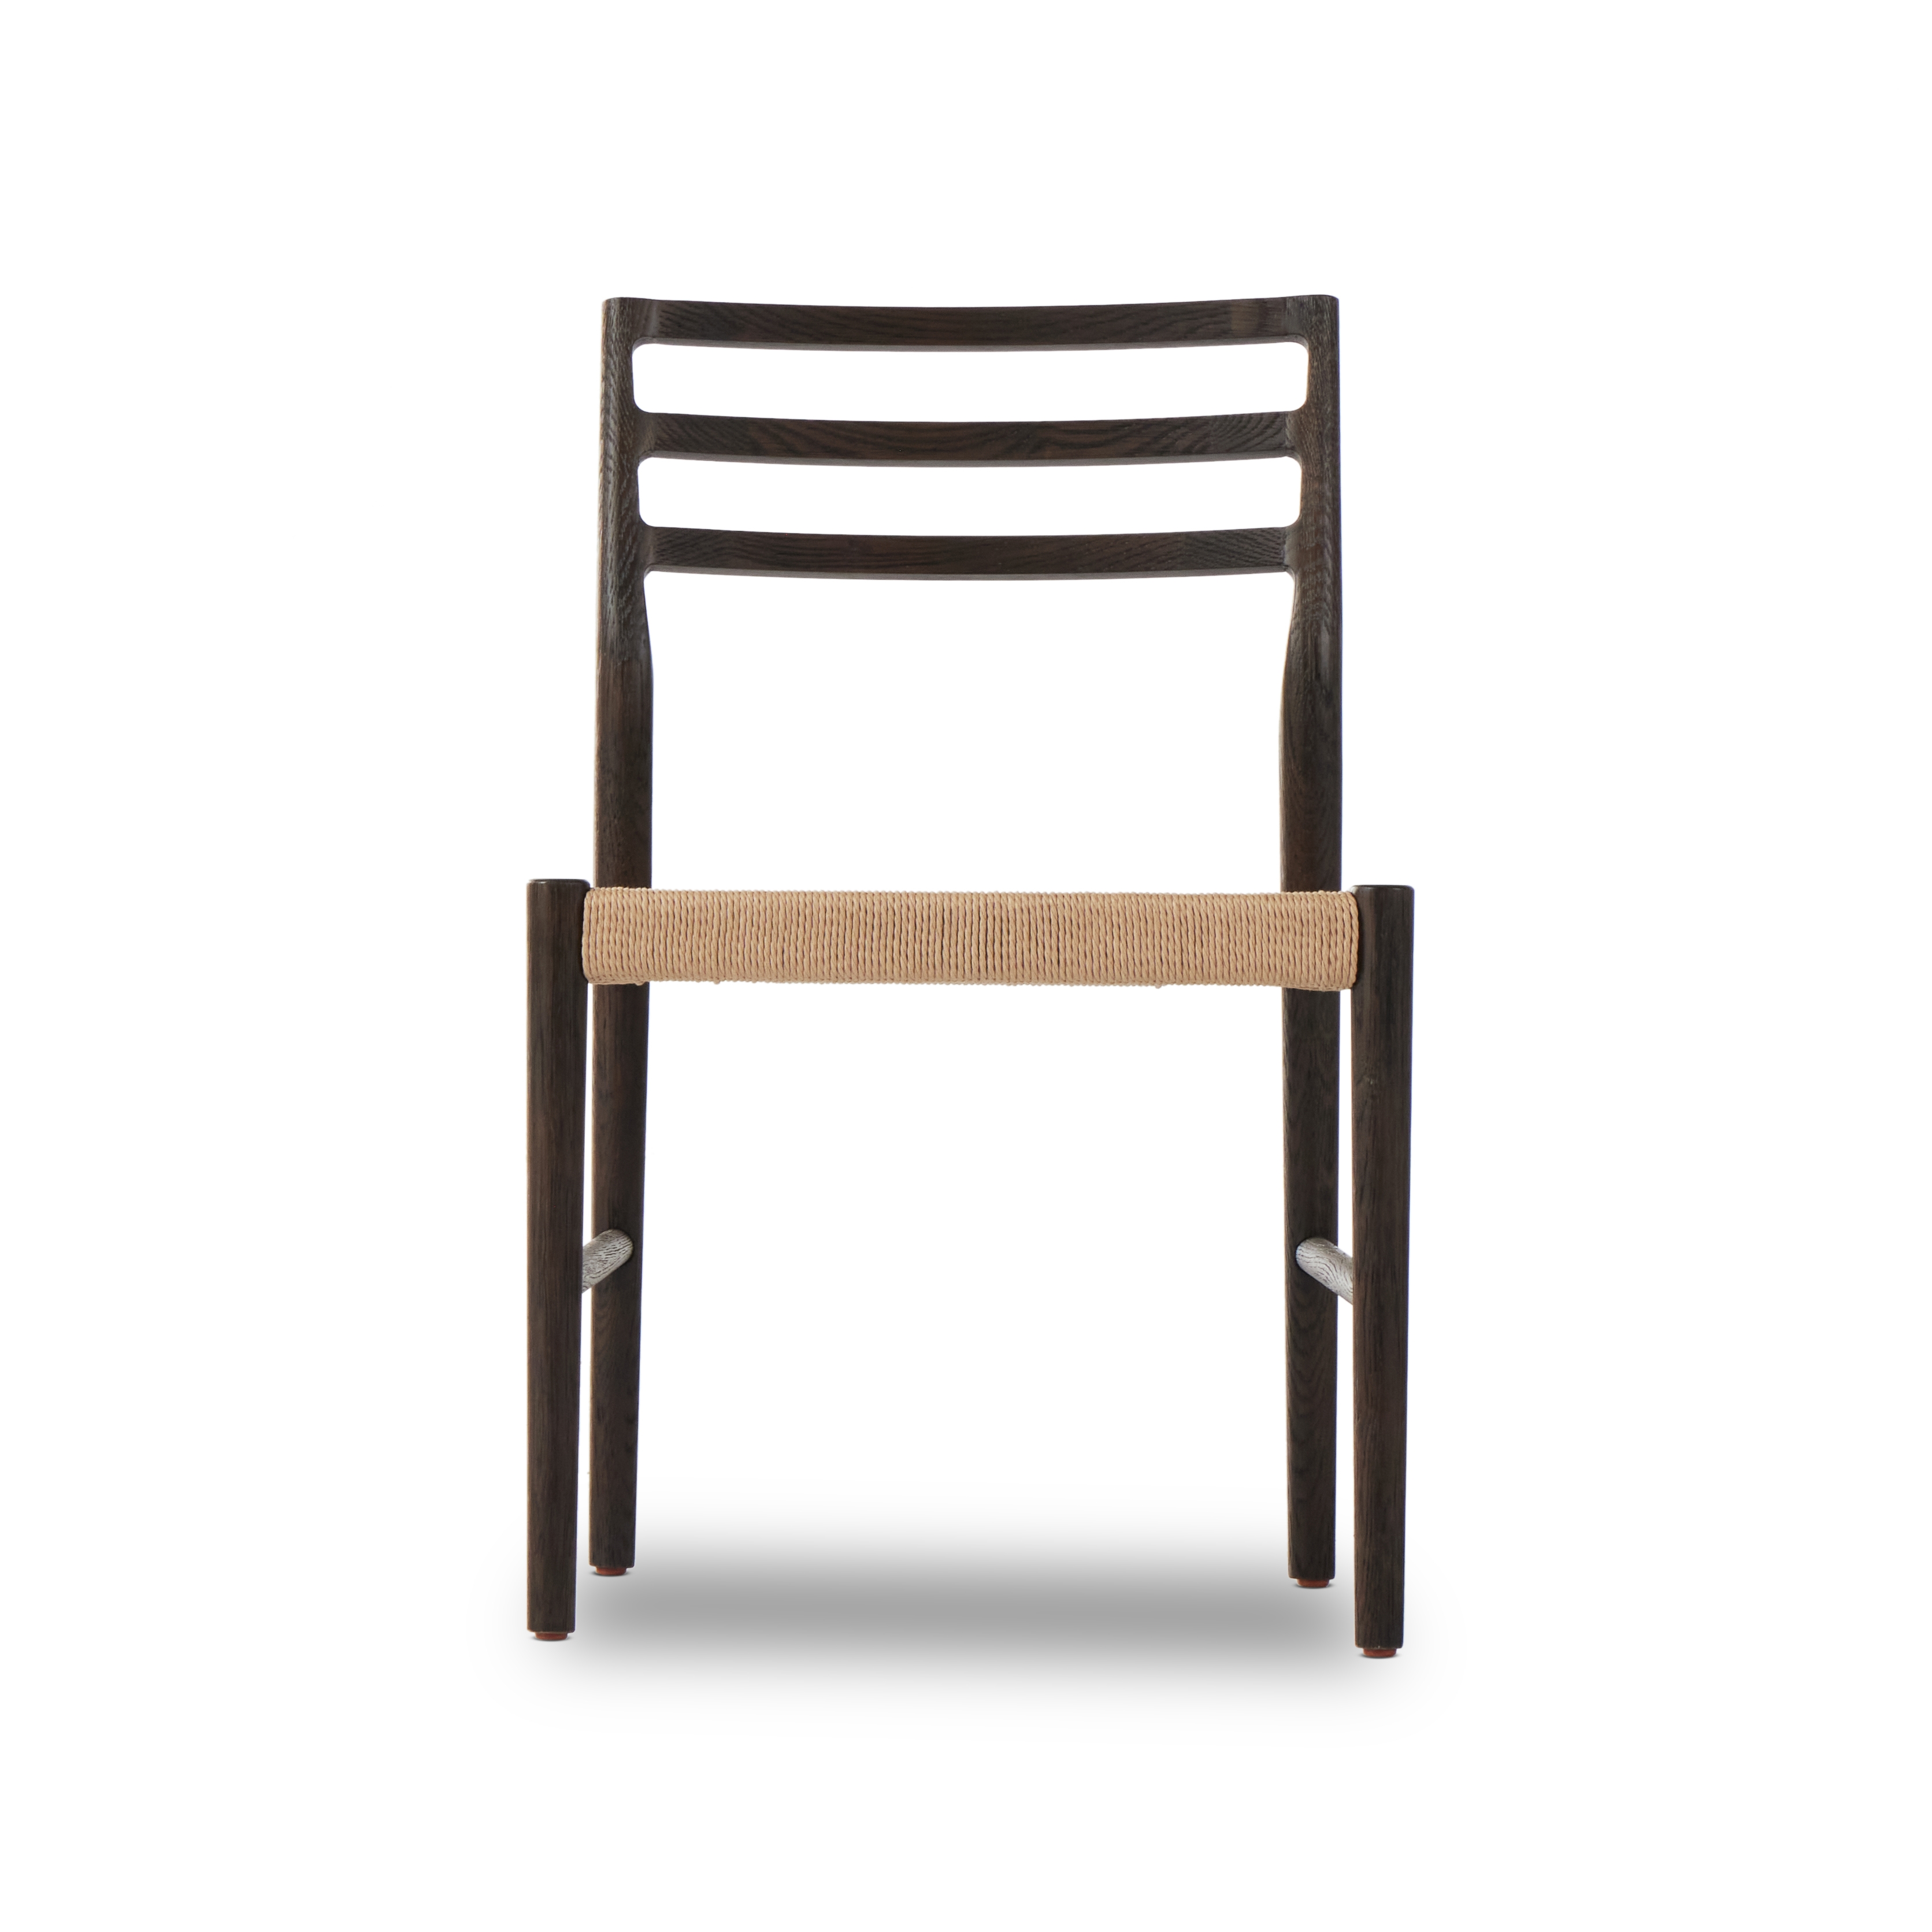 Glenmore Woven Dining Chair-Light Carbon - Image 3